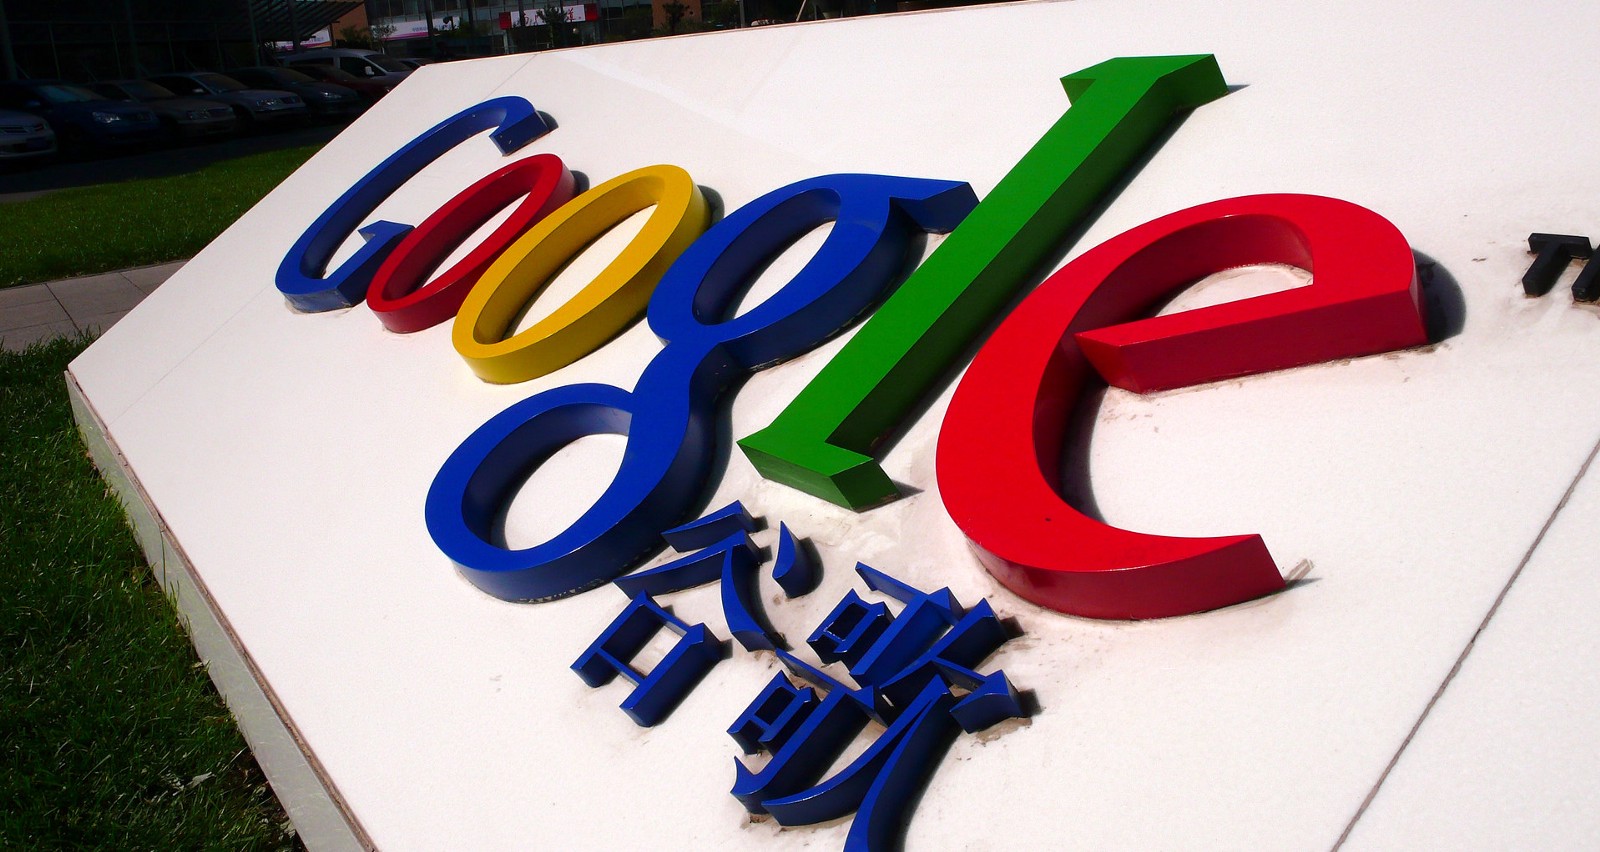 Google earns solid $3b from China, despite stranded plans to re-enter the country